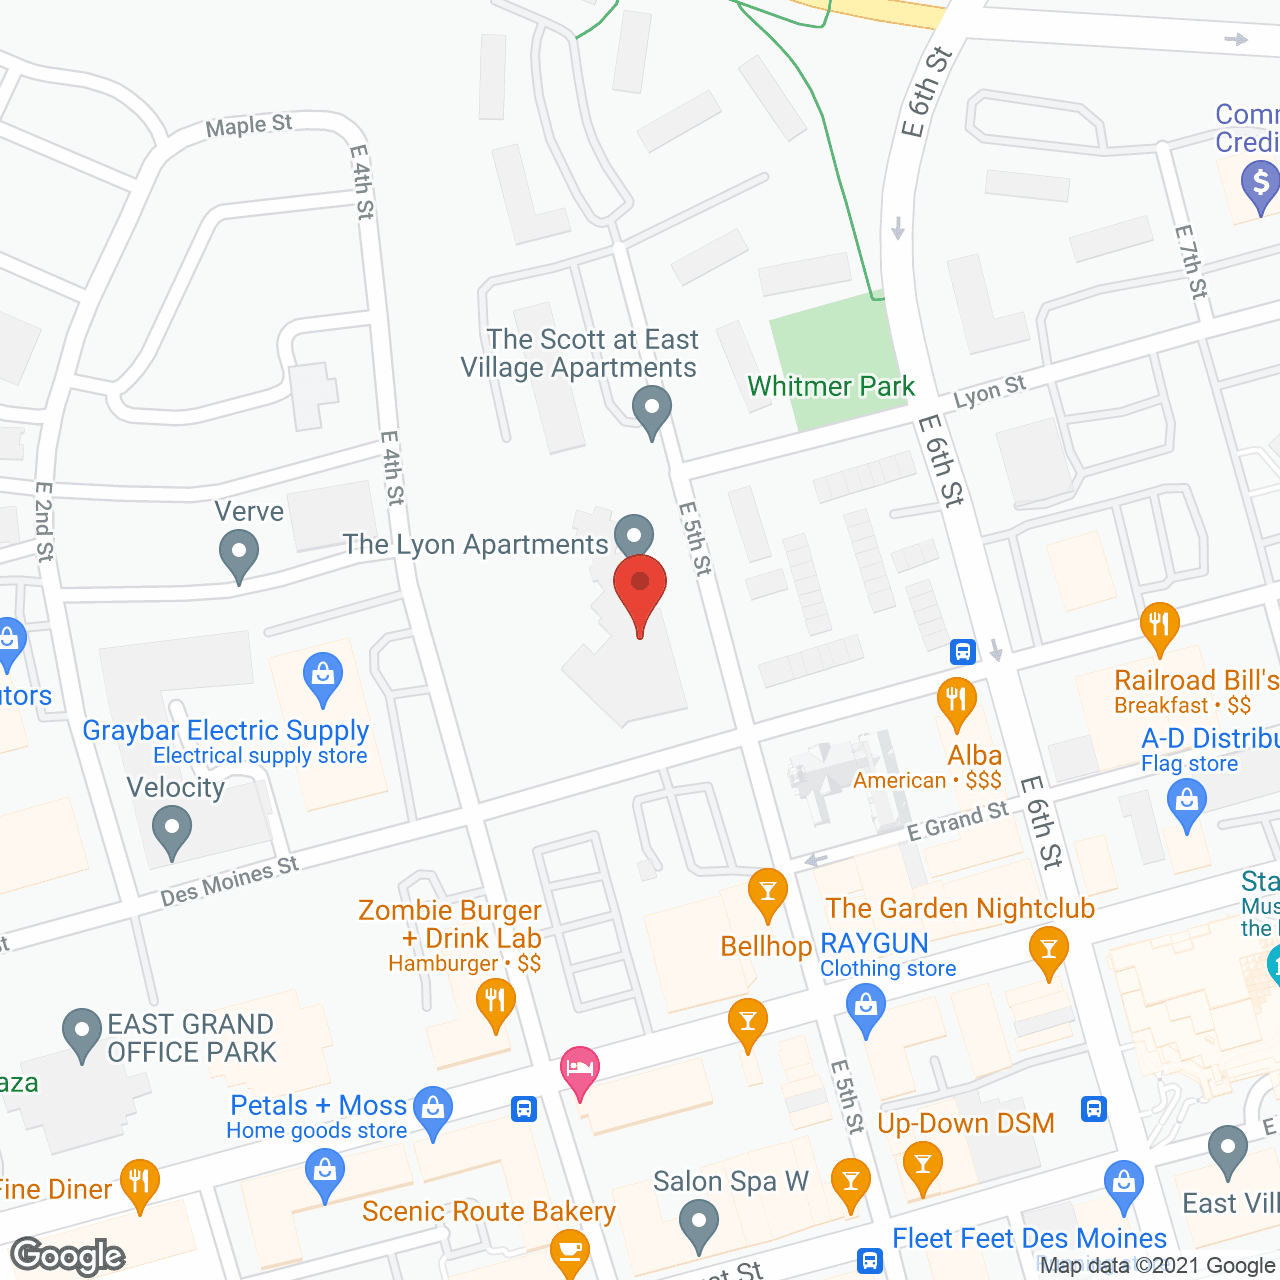 Prime Towers Apartments and Nursing Home in google map